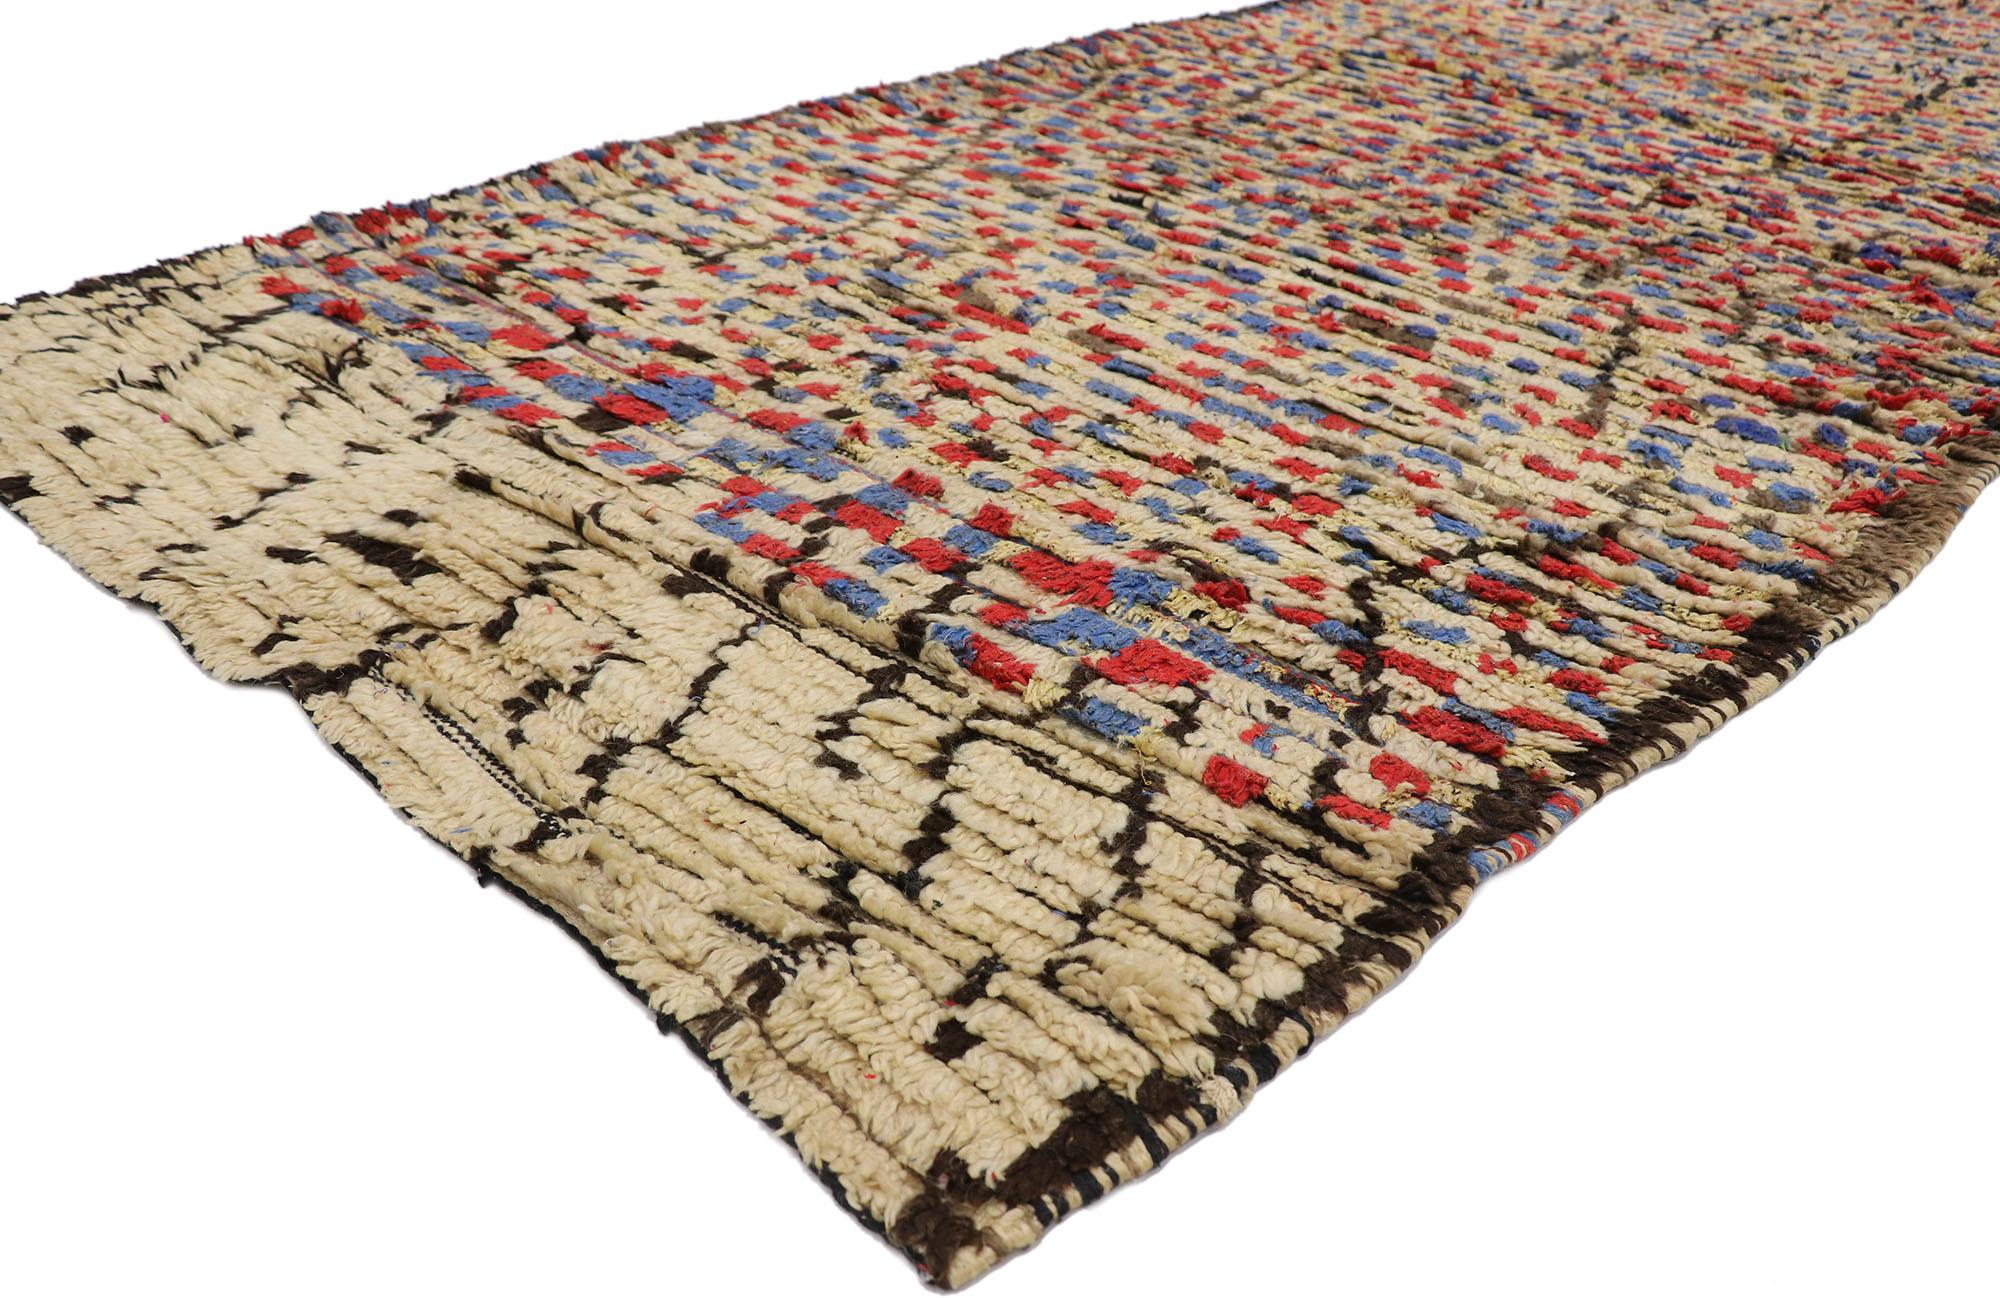 21455 Vintage Berber Moroccan Azilal rug with Tribal Style 04'11 x 10'00. Showcasing bold expressive linear art form, incredible detail and texture, this hand knotted wool vintage Berber Moroccan Azilal rug is a captivating vision of woven beauty.